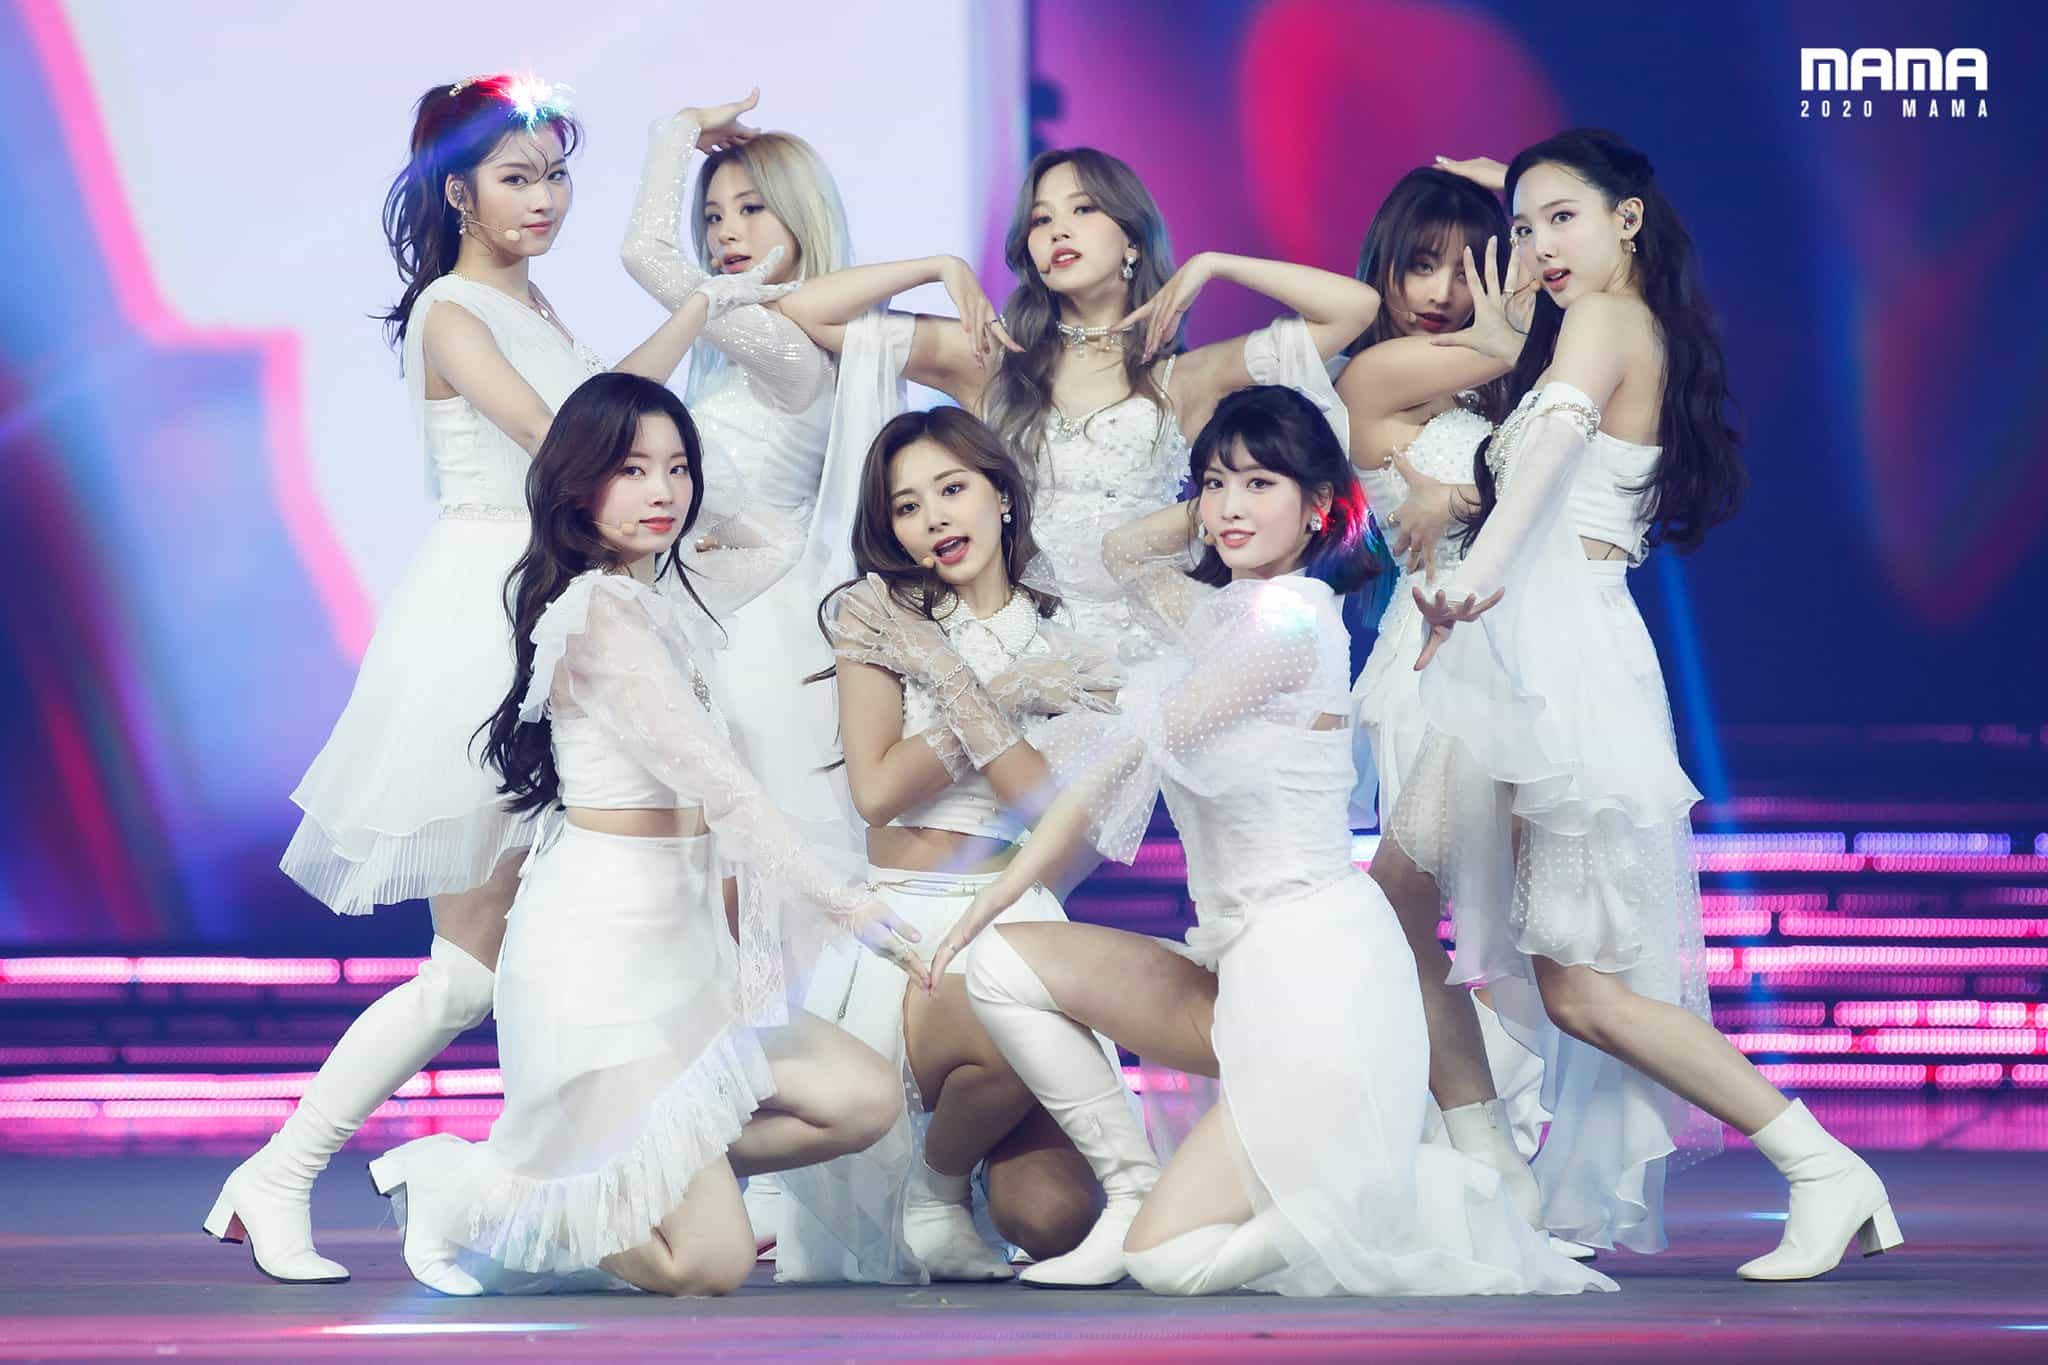 MAMA 2020: TWICE debuts unreleased song 'CRY FOR ME' at the Mnet Asian